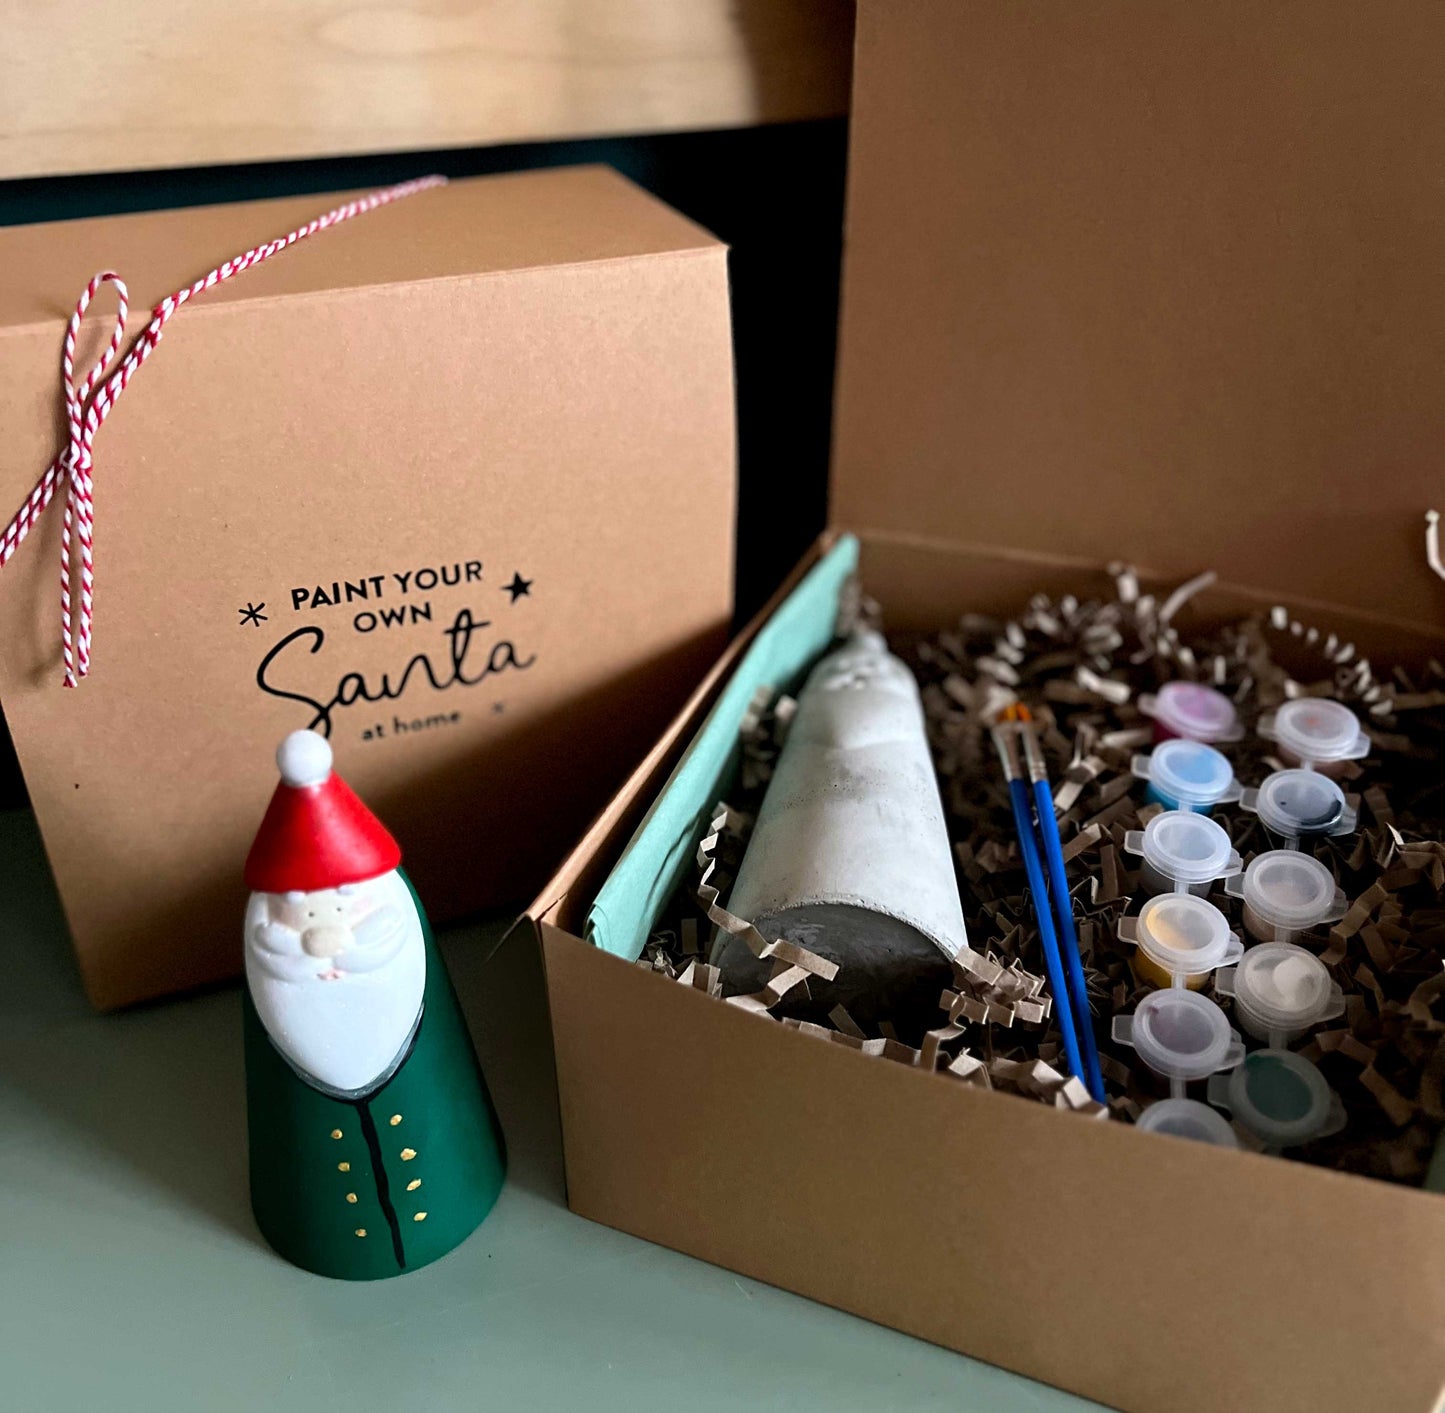 'Paint your own Santa' Gift Box